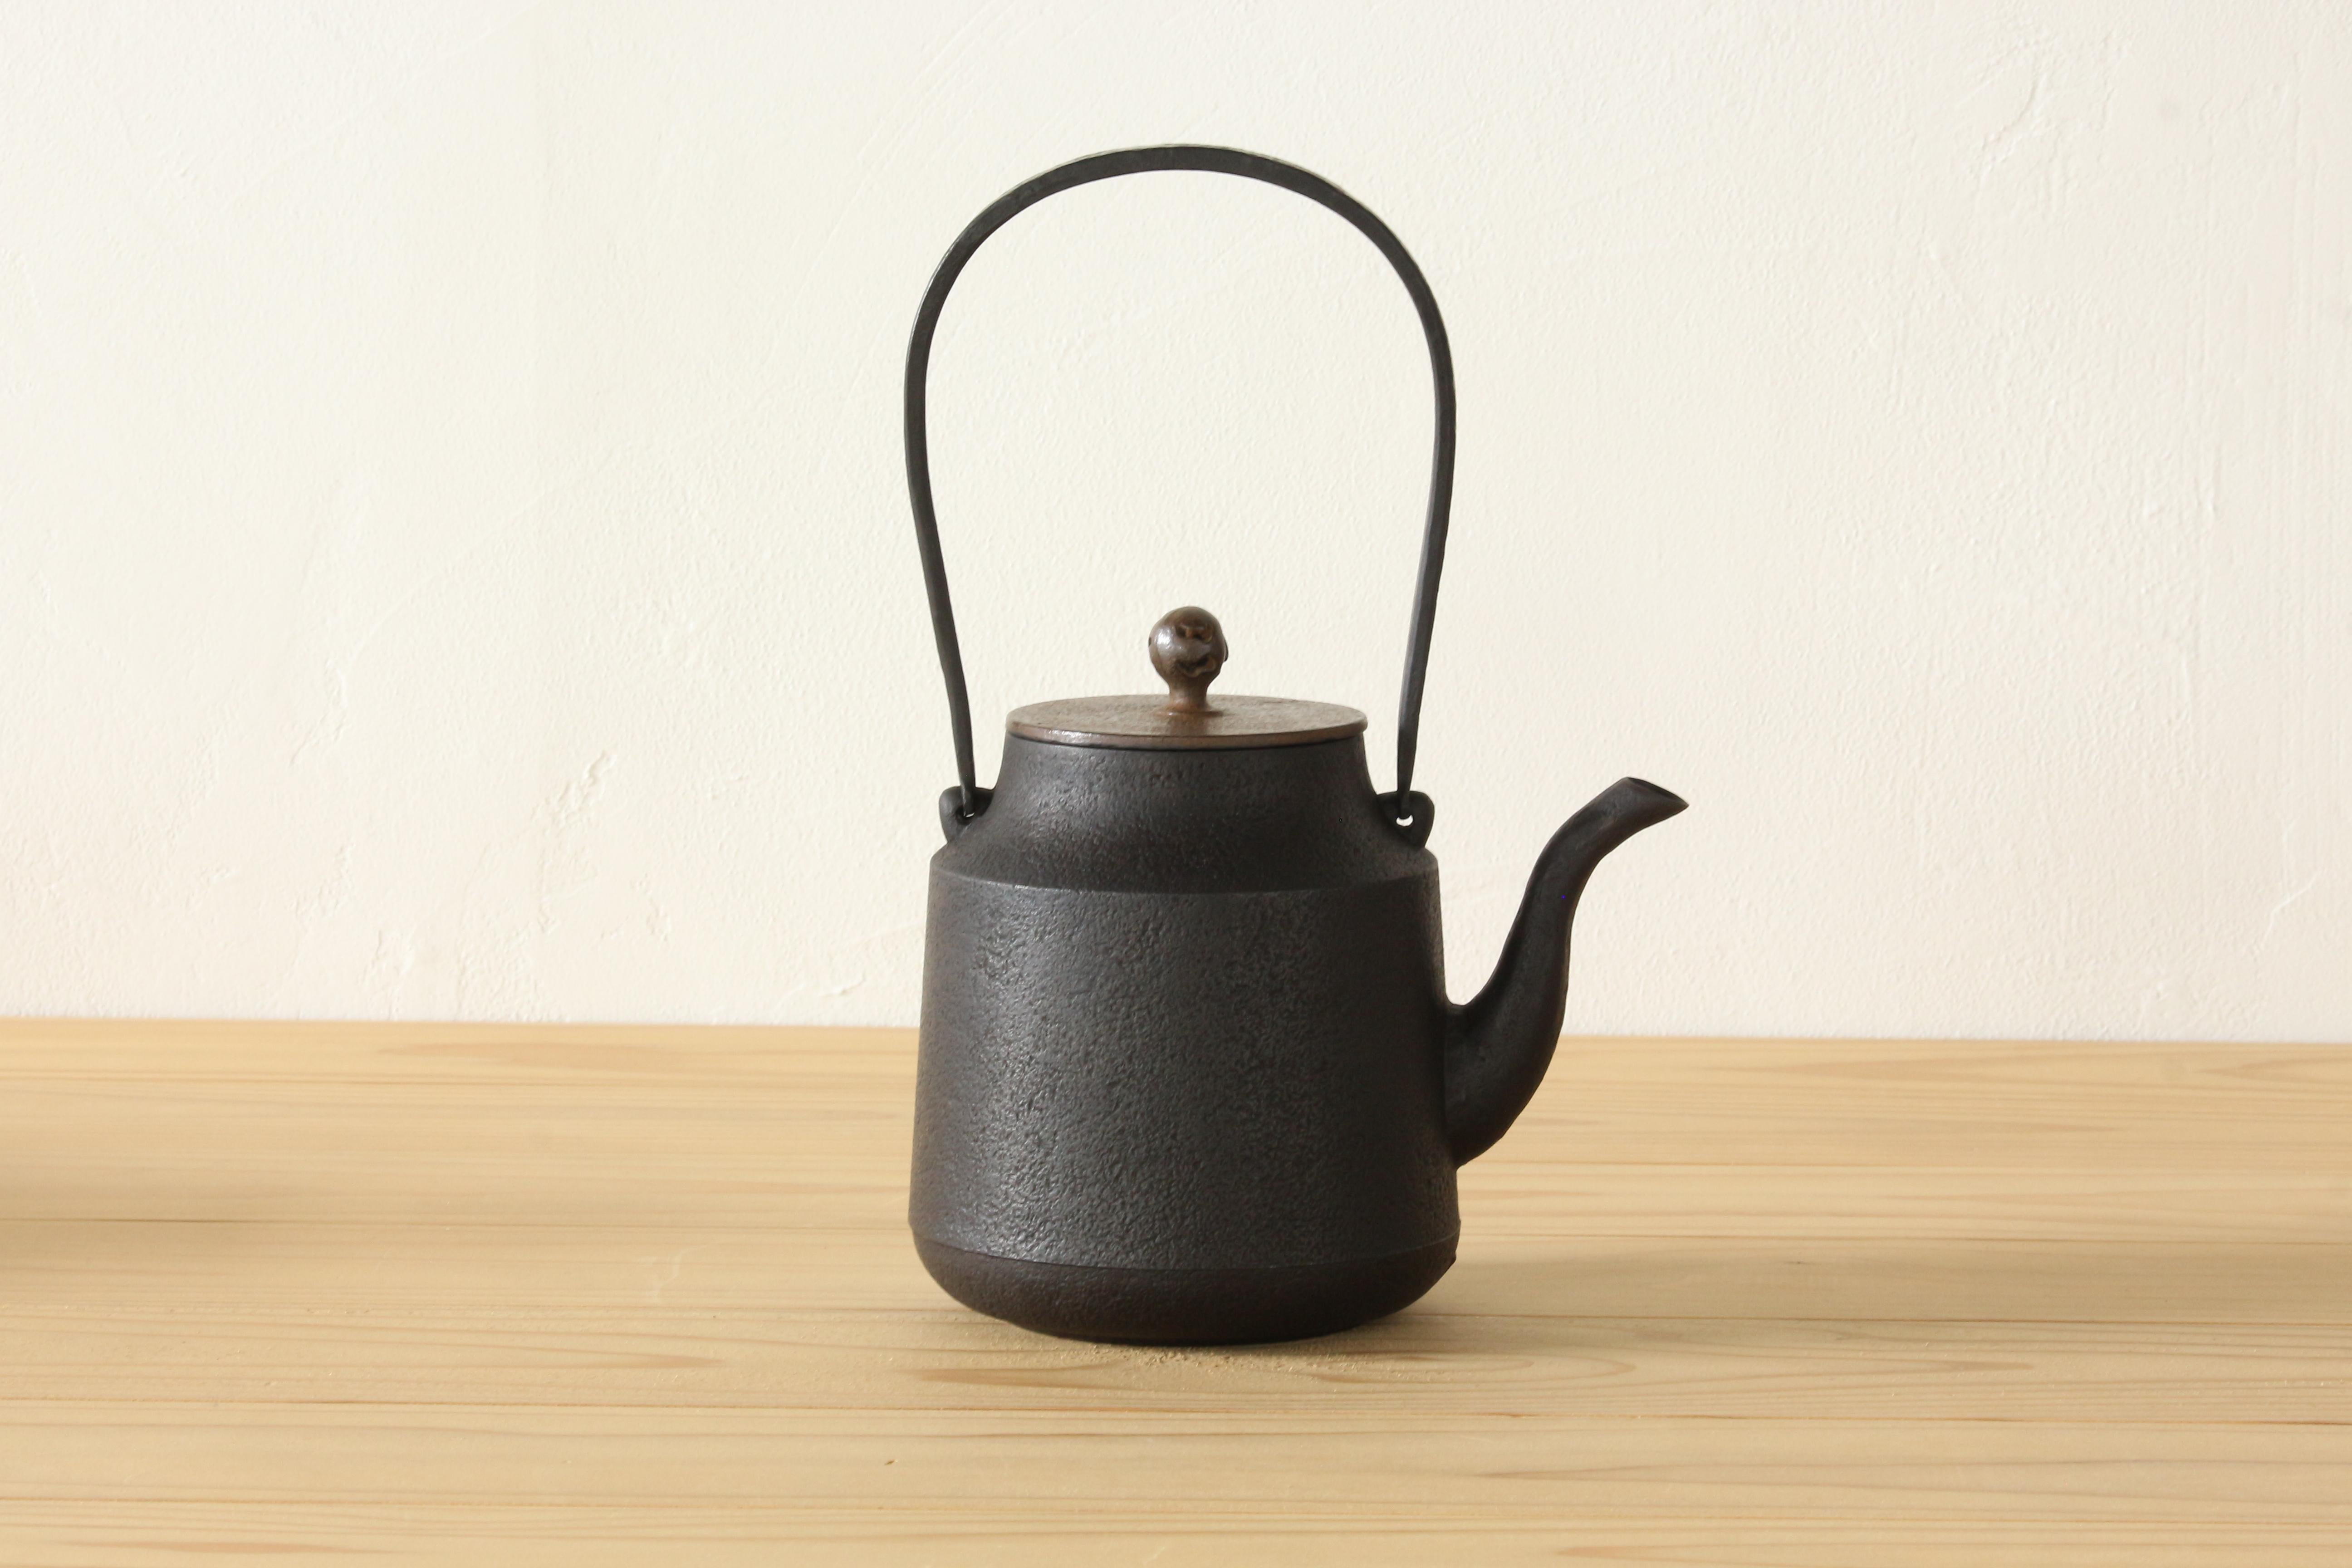 Cast iron kettle

Measures: 10.5” H x 7” L x 4.5” Ø

Made in Japan

The Oigen foundry is located in area that has been producing Nambu ironware for 900 years. By casting in a fine grain sand the ironware has a renowned smooth and unblemished